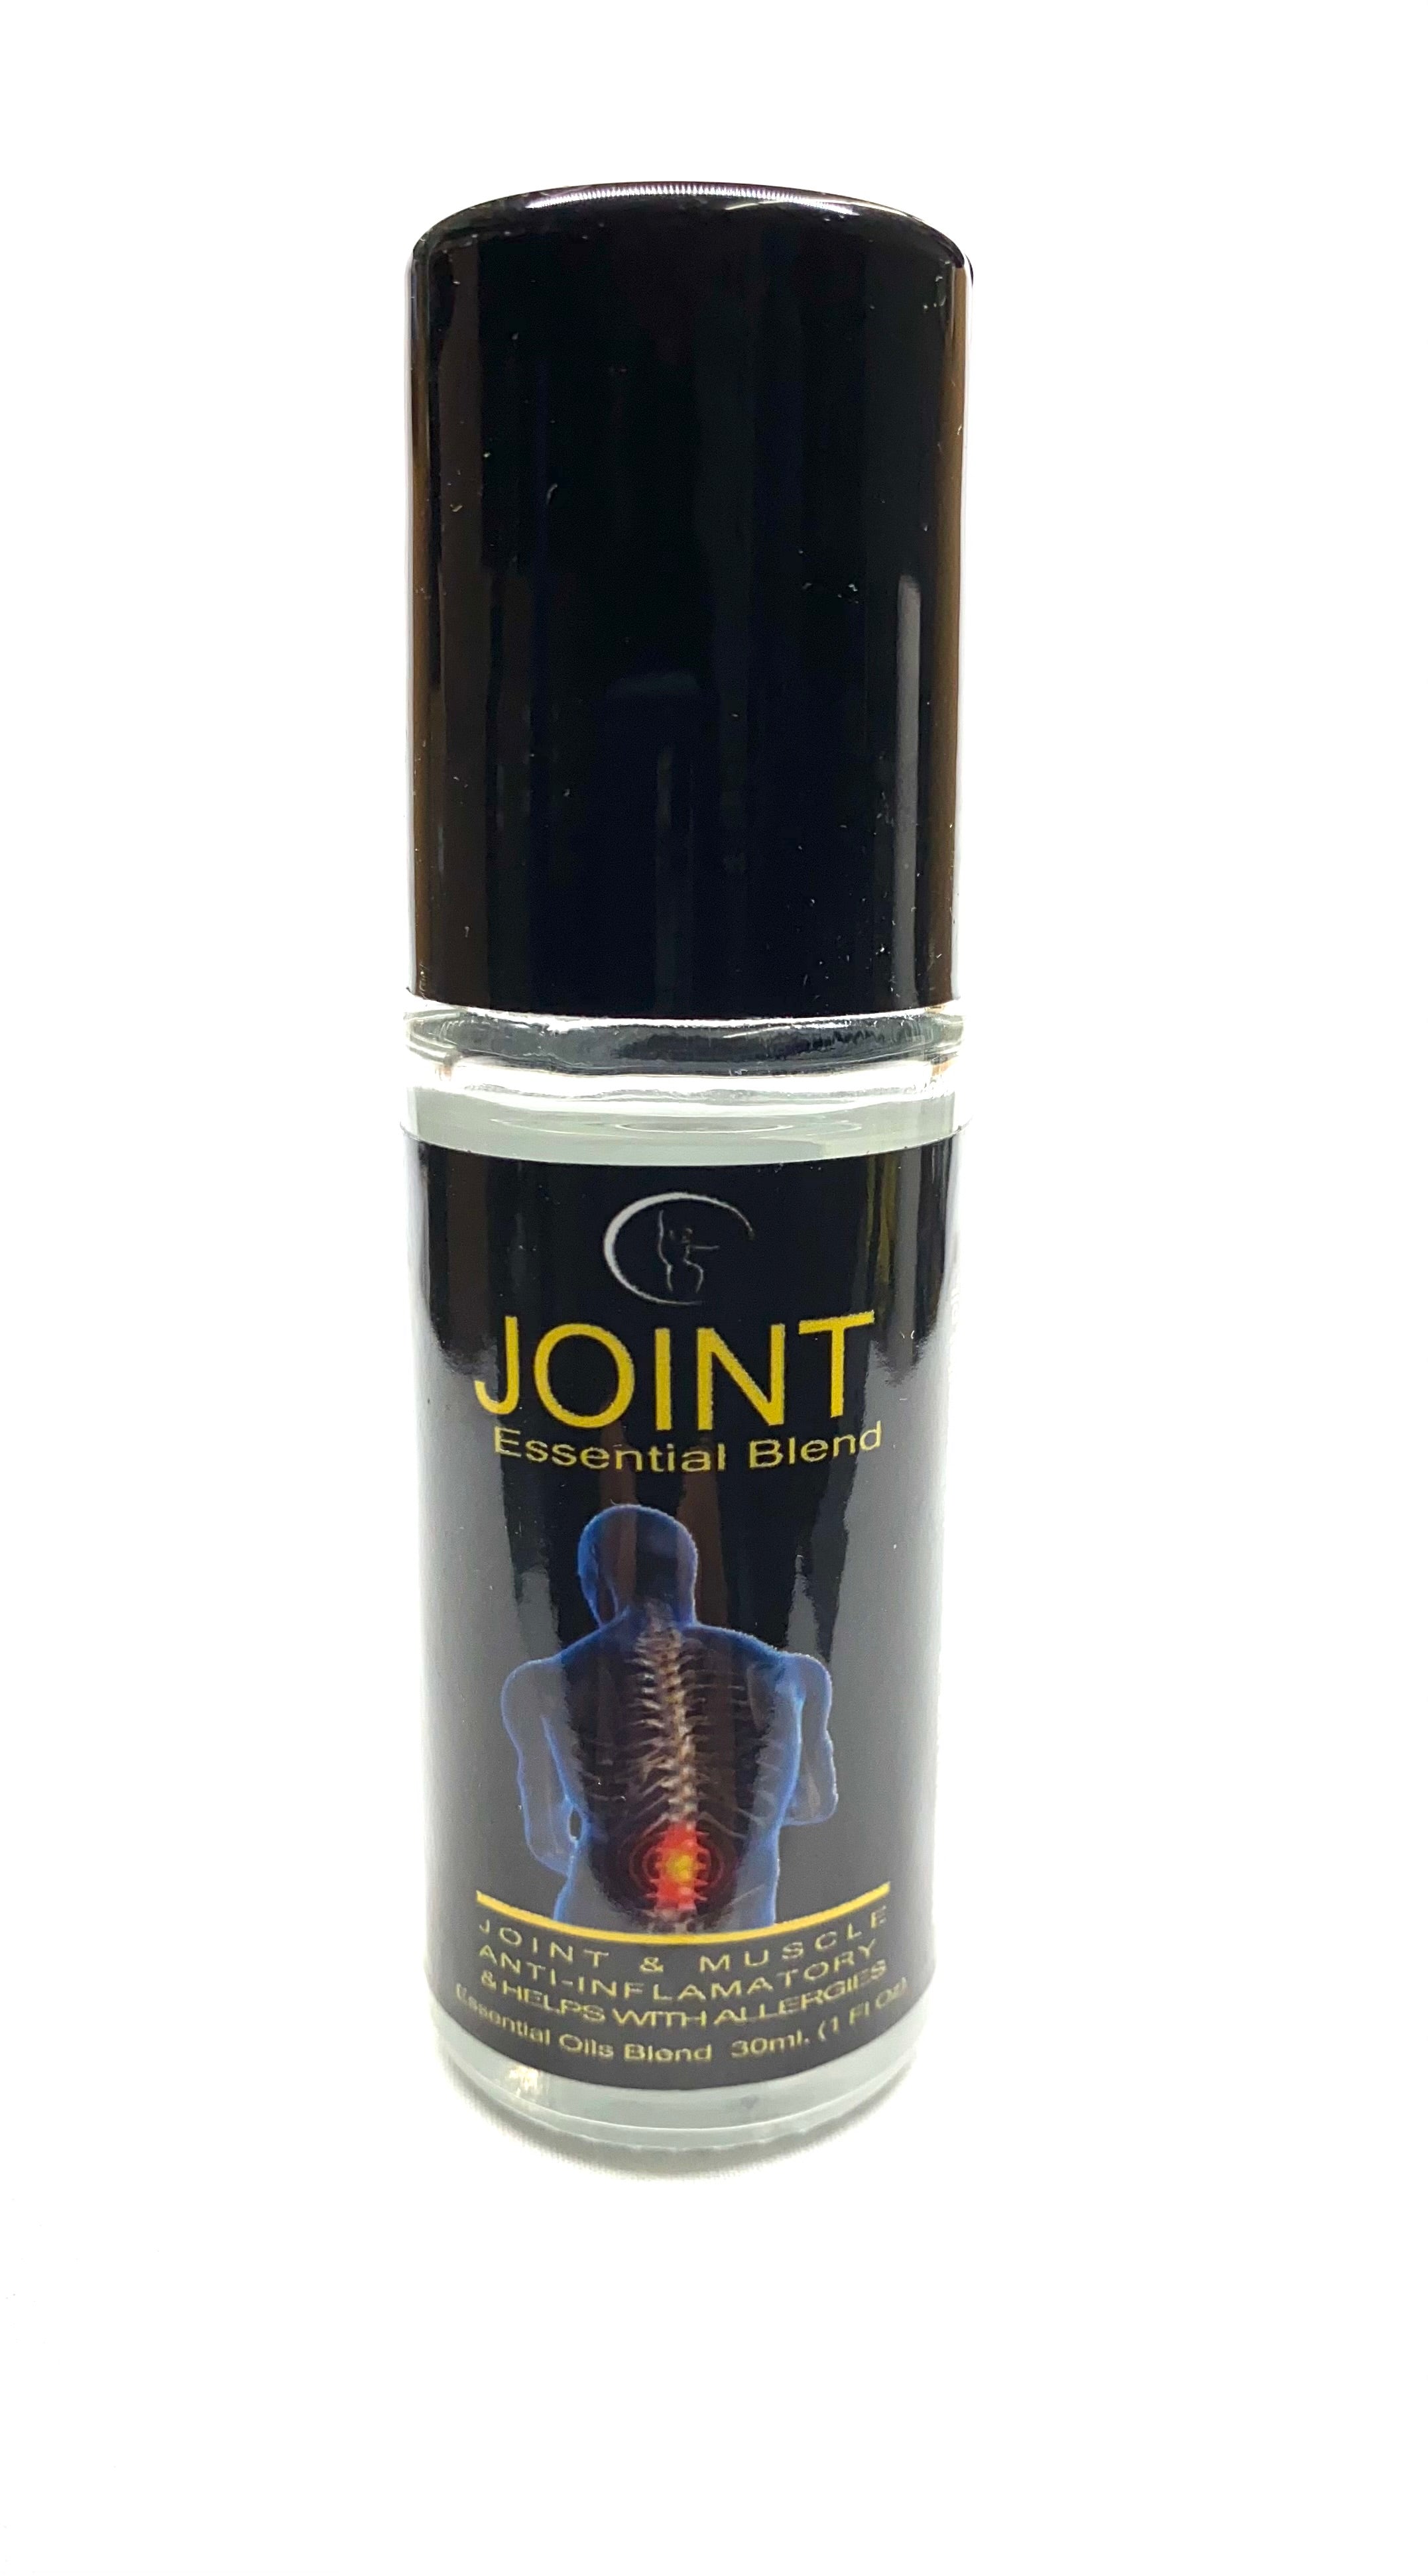 JOINT Essential Blend new arrival !